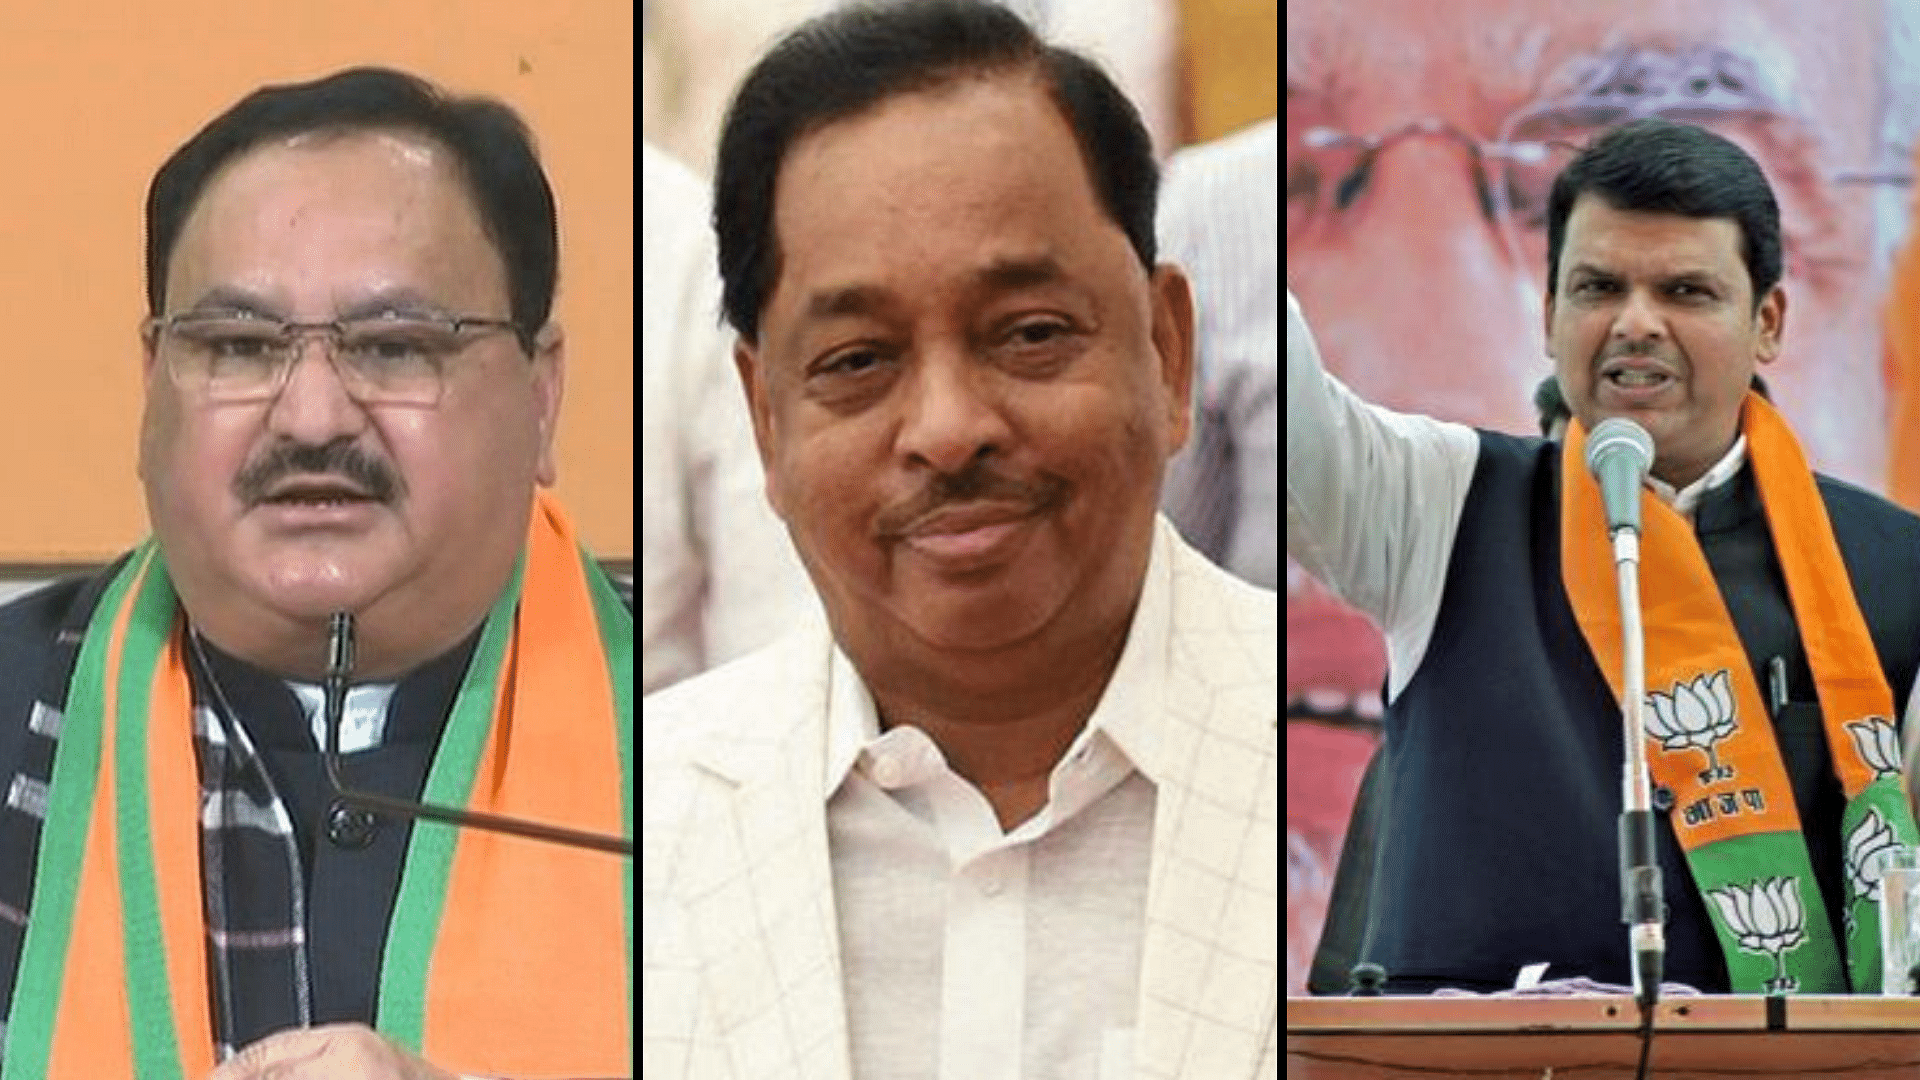 <div class="paragraphs"><p>Bharatiya Janata Party (BJP) President JP Nadda condemned the action condemned Union Minister Narayan Rane's arrest on Tuesday, 24 August, over his remarks about giving 'a tight slap' to Maharashtra Chief Minister Uddhav Thackeray.</p></div>